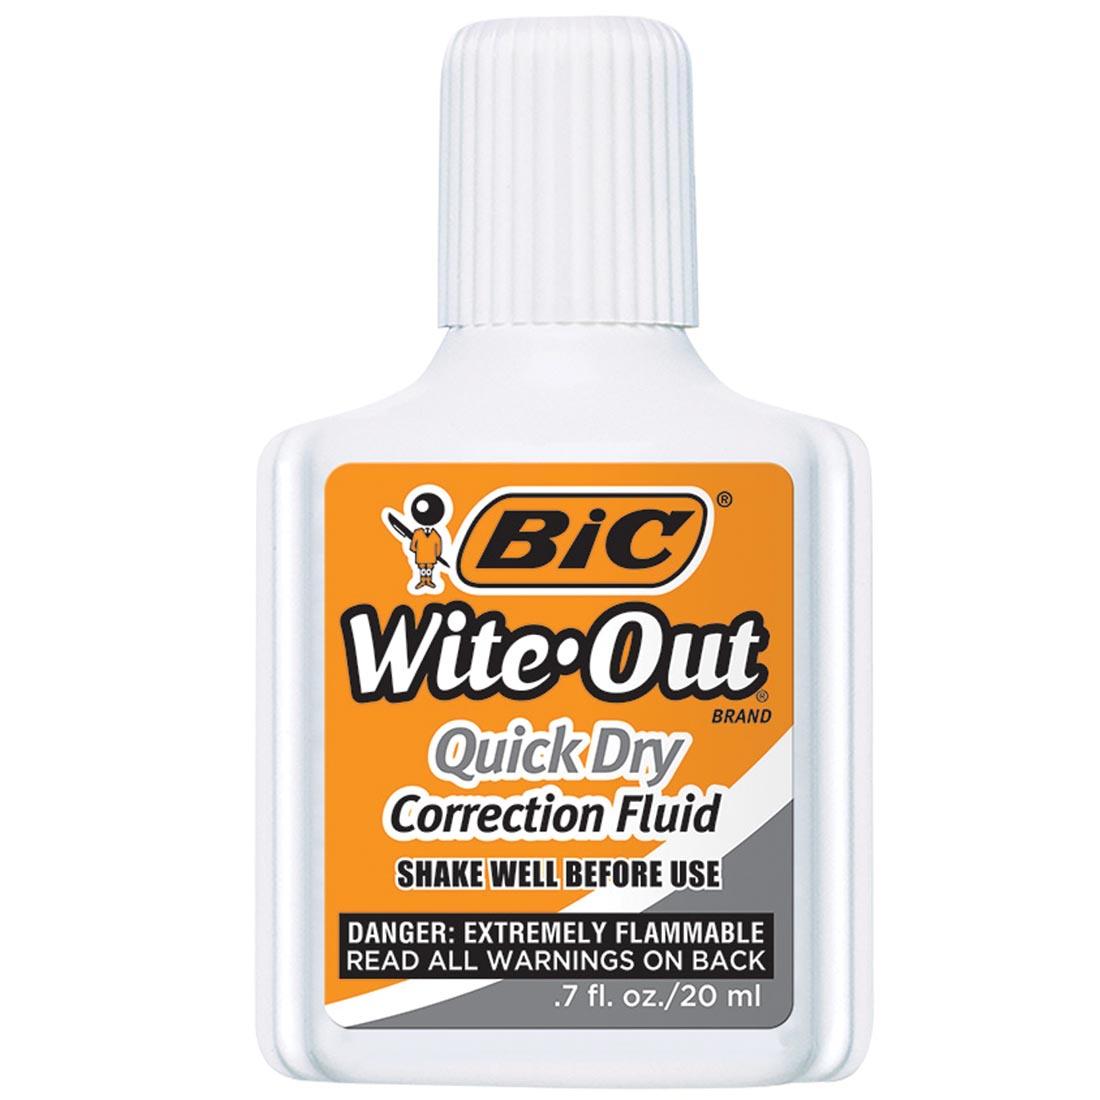 BiC Wite-Out Quick Dry Correction Fluid